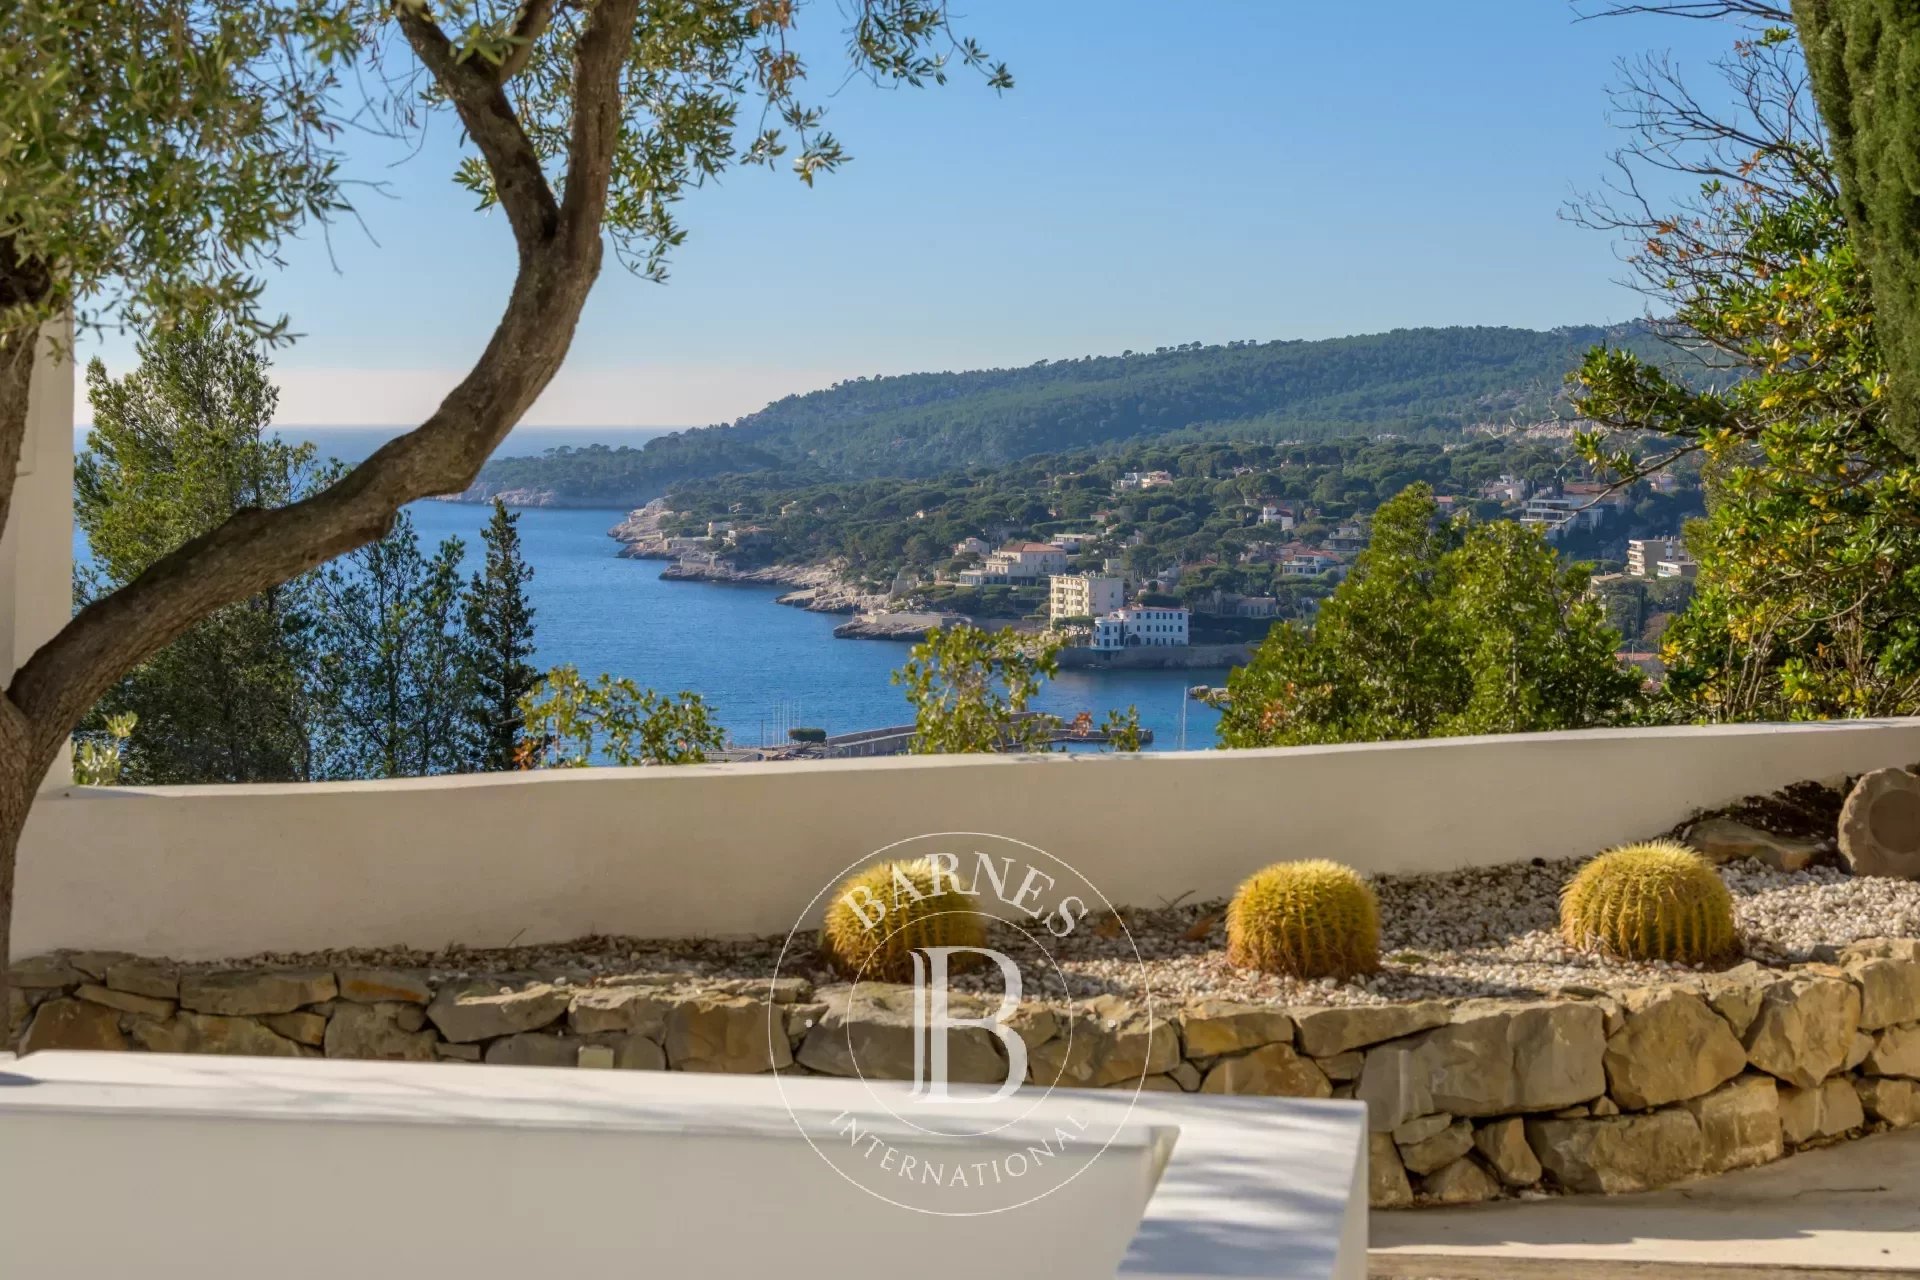 Vente - Cassis - Luxe - Vue mer panoramique - picture 3 title=